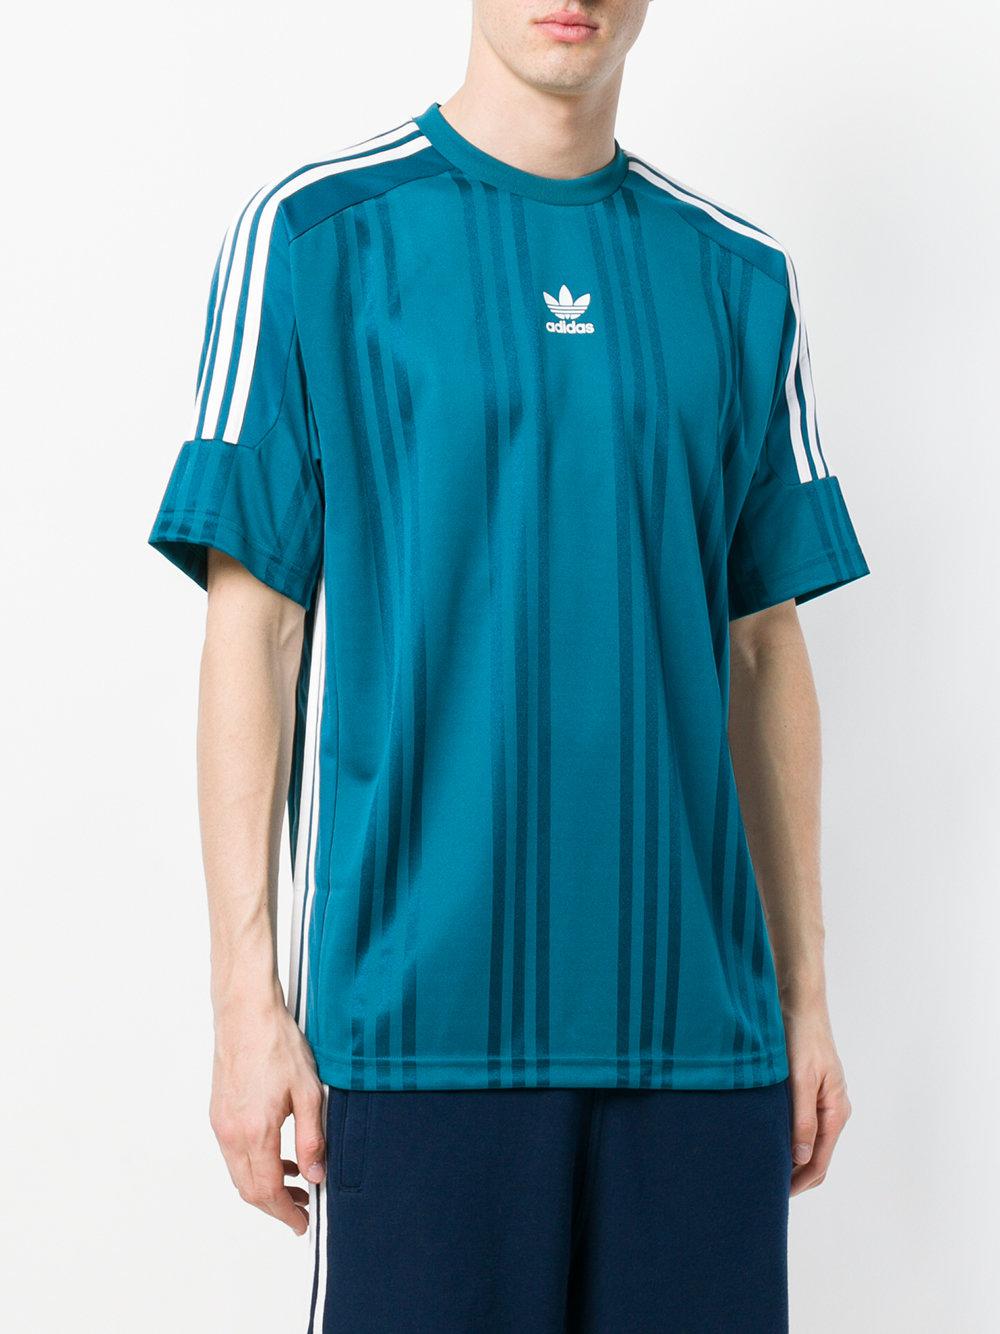 adidas Originals 3 Stripes Jacquard Jersey T-shirt in Blue for Men | Lyst  Canada